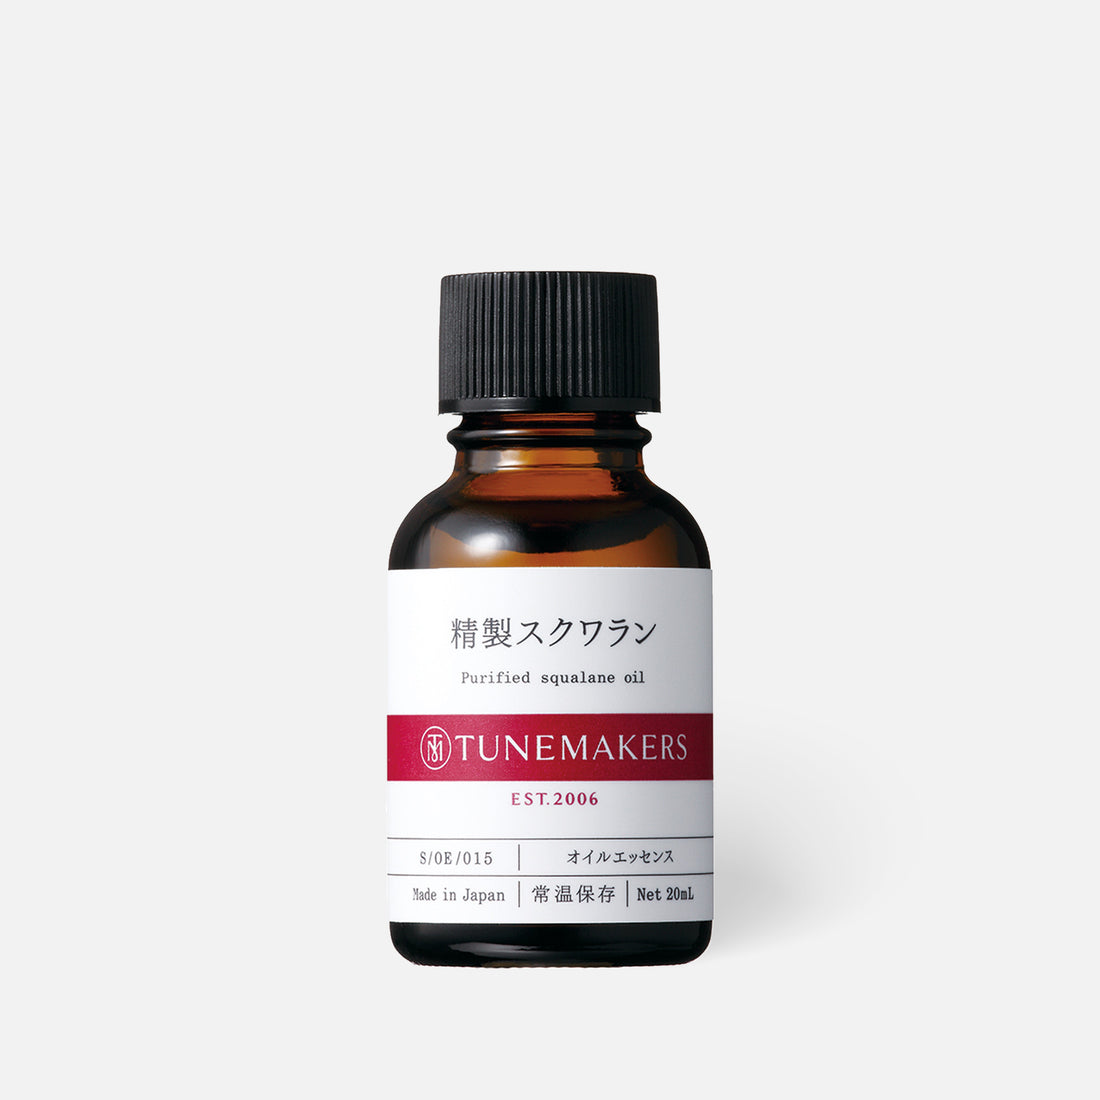 Tunemakers Purified Squalane Oil 20ml